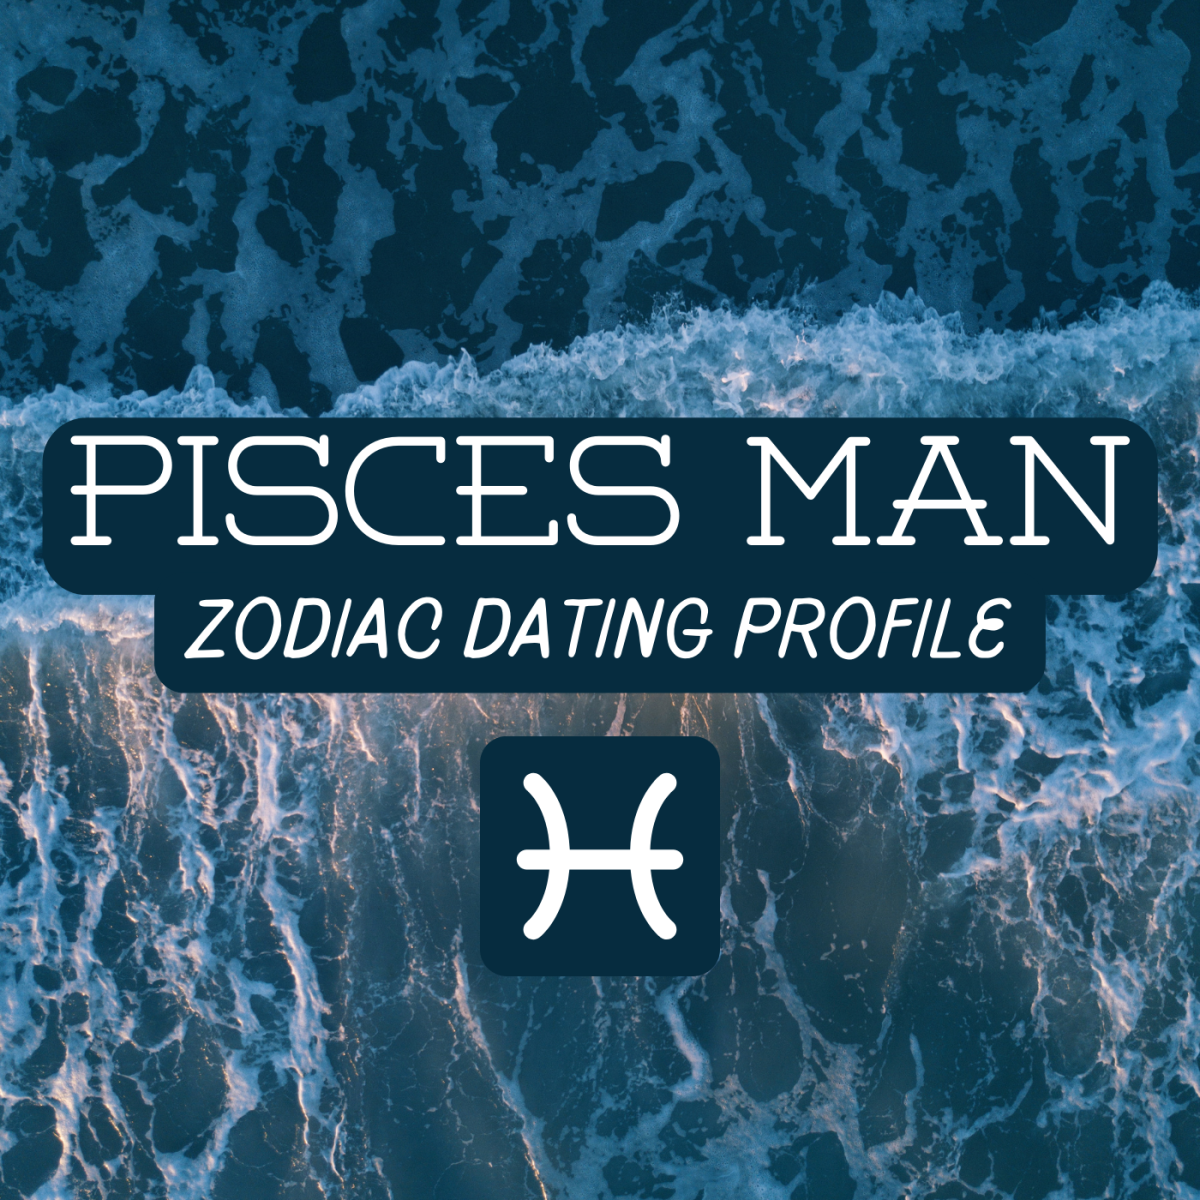 What's it like to date a sensitive Pisces guy? Find out here! (Warning: humor ahead!)